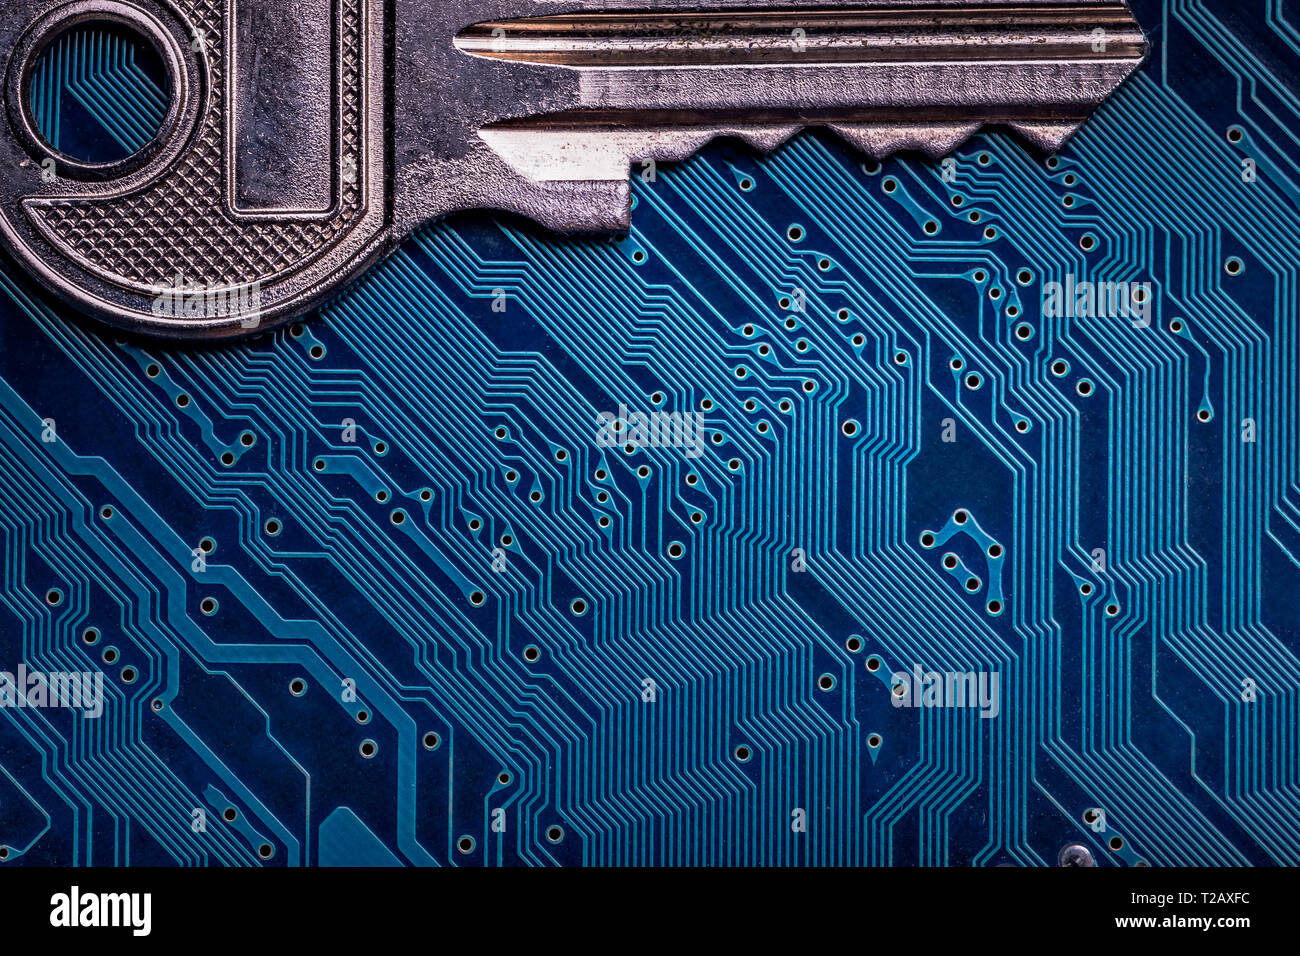 Background image of key on a microchip Stock Photo